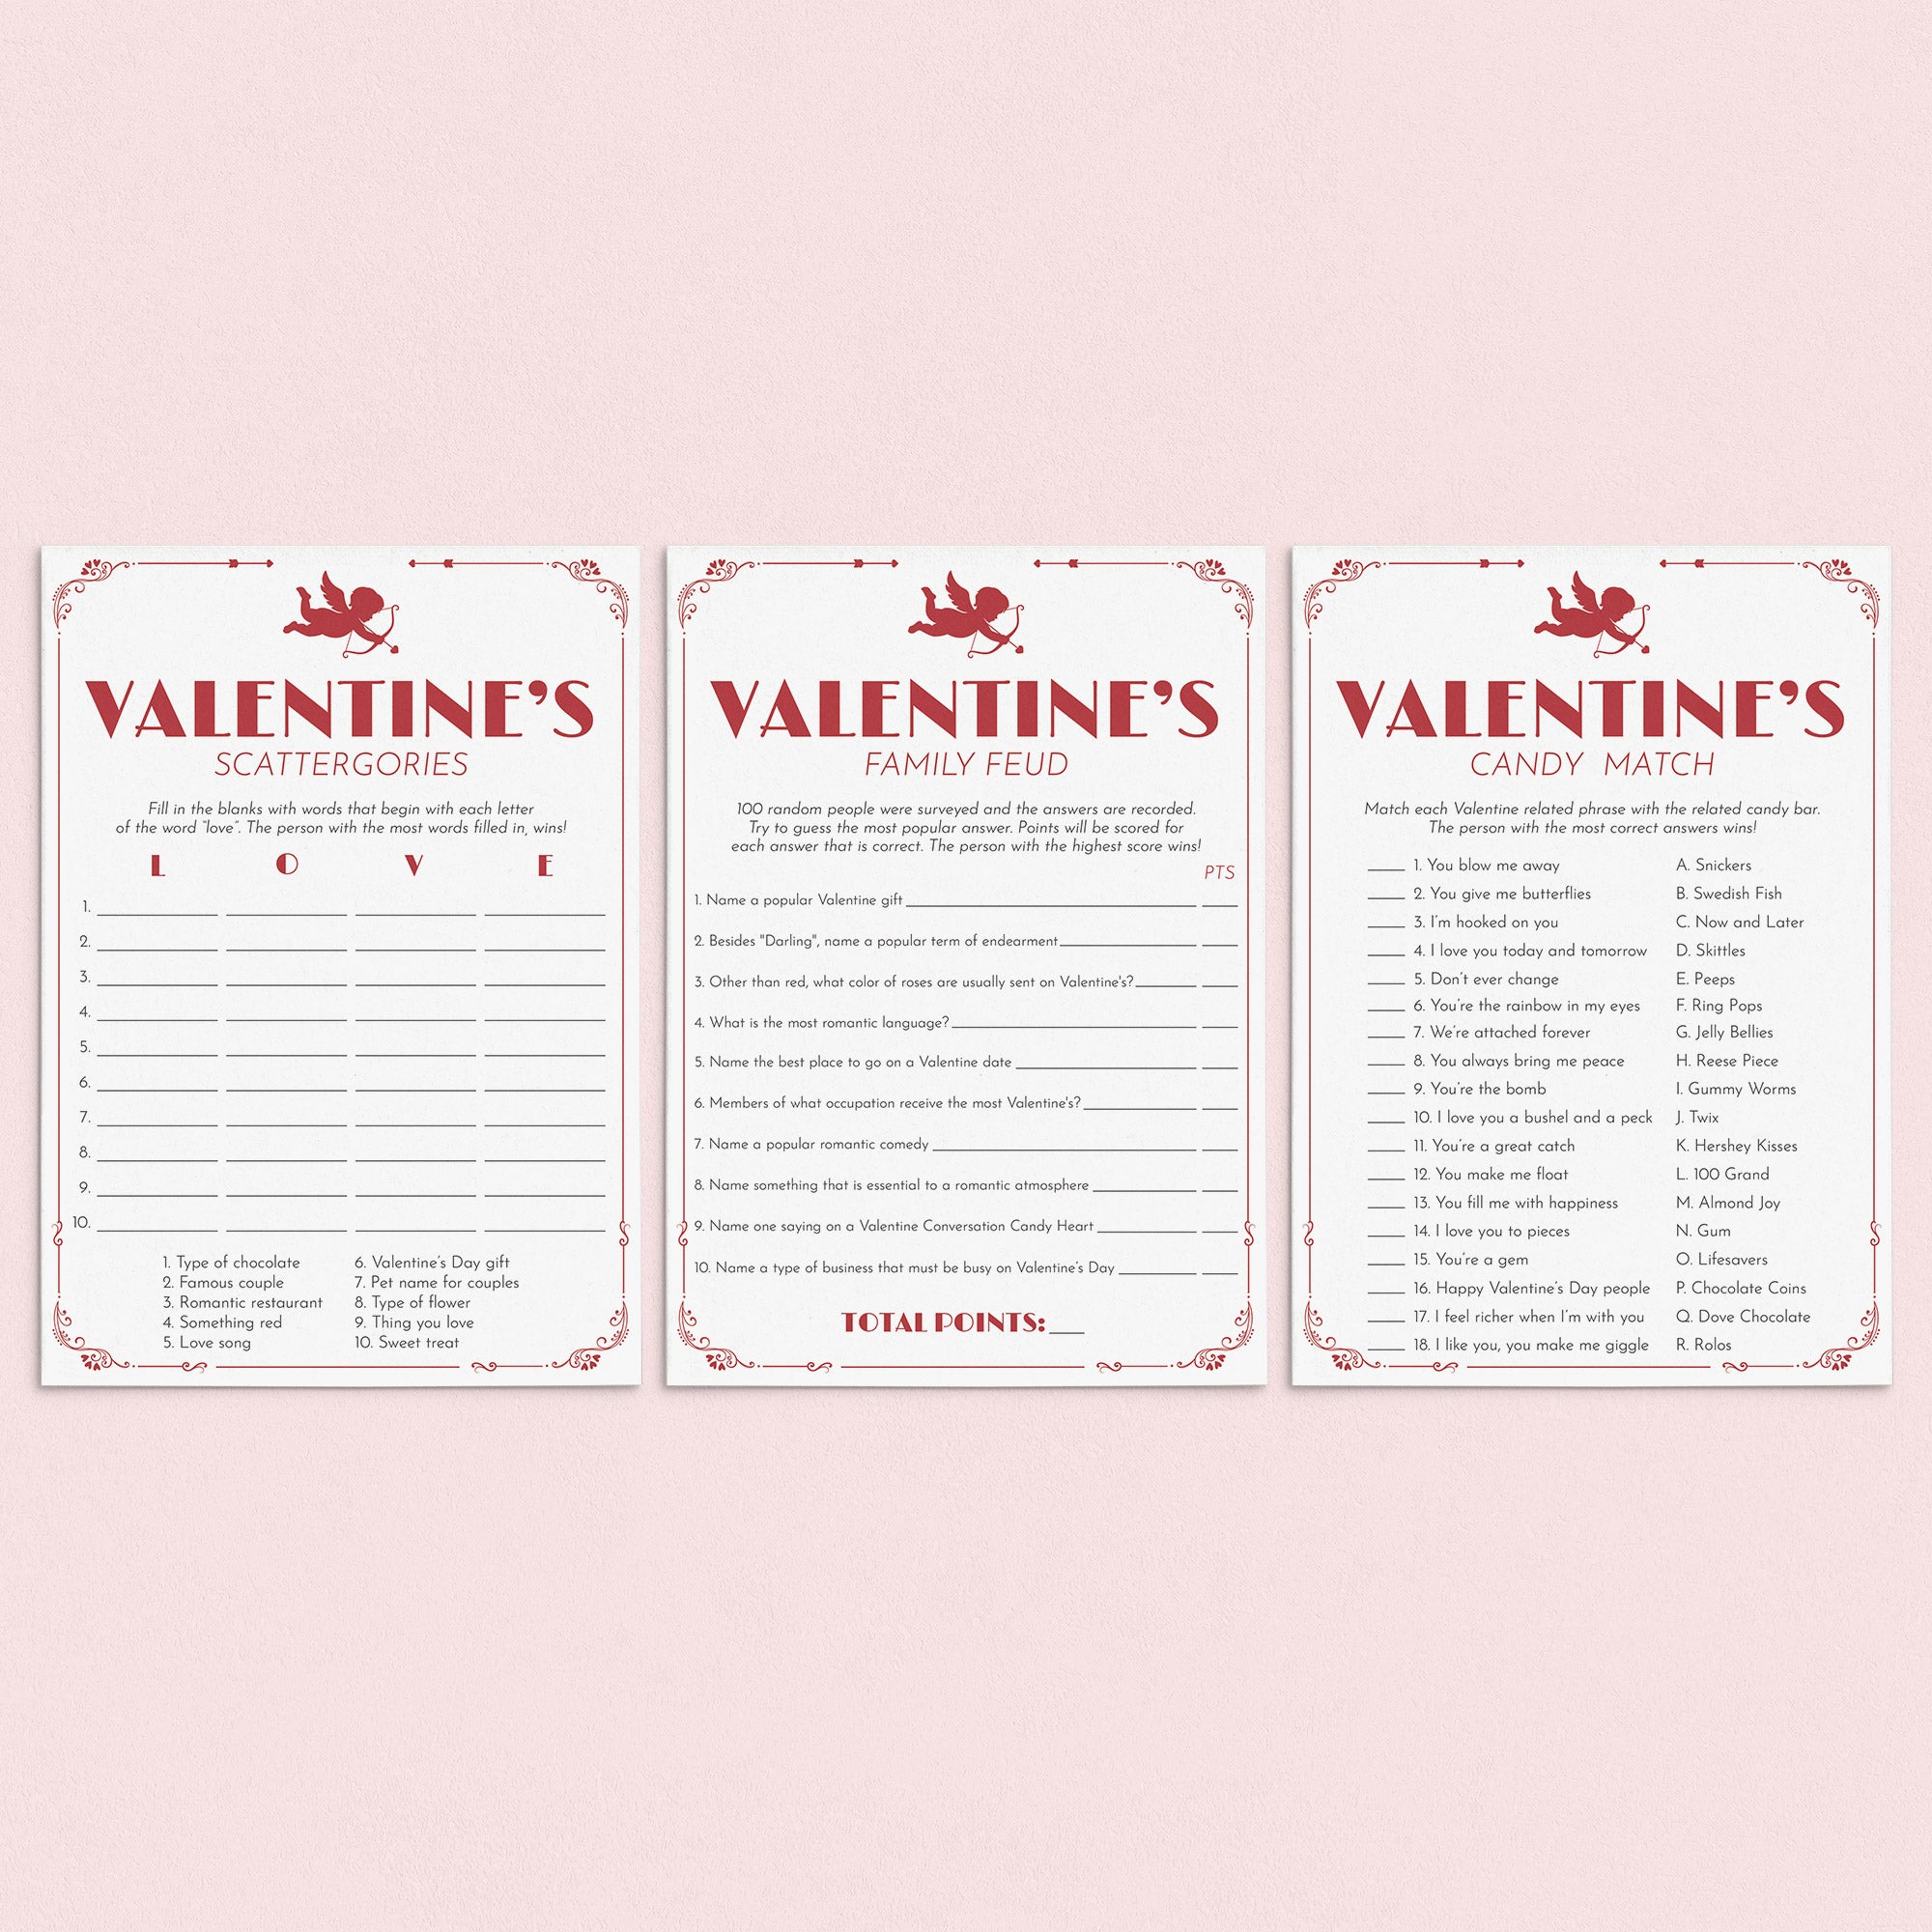 Valentines Party Games Printable Red Cupid by LittleSizzle